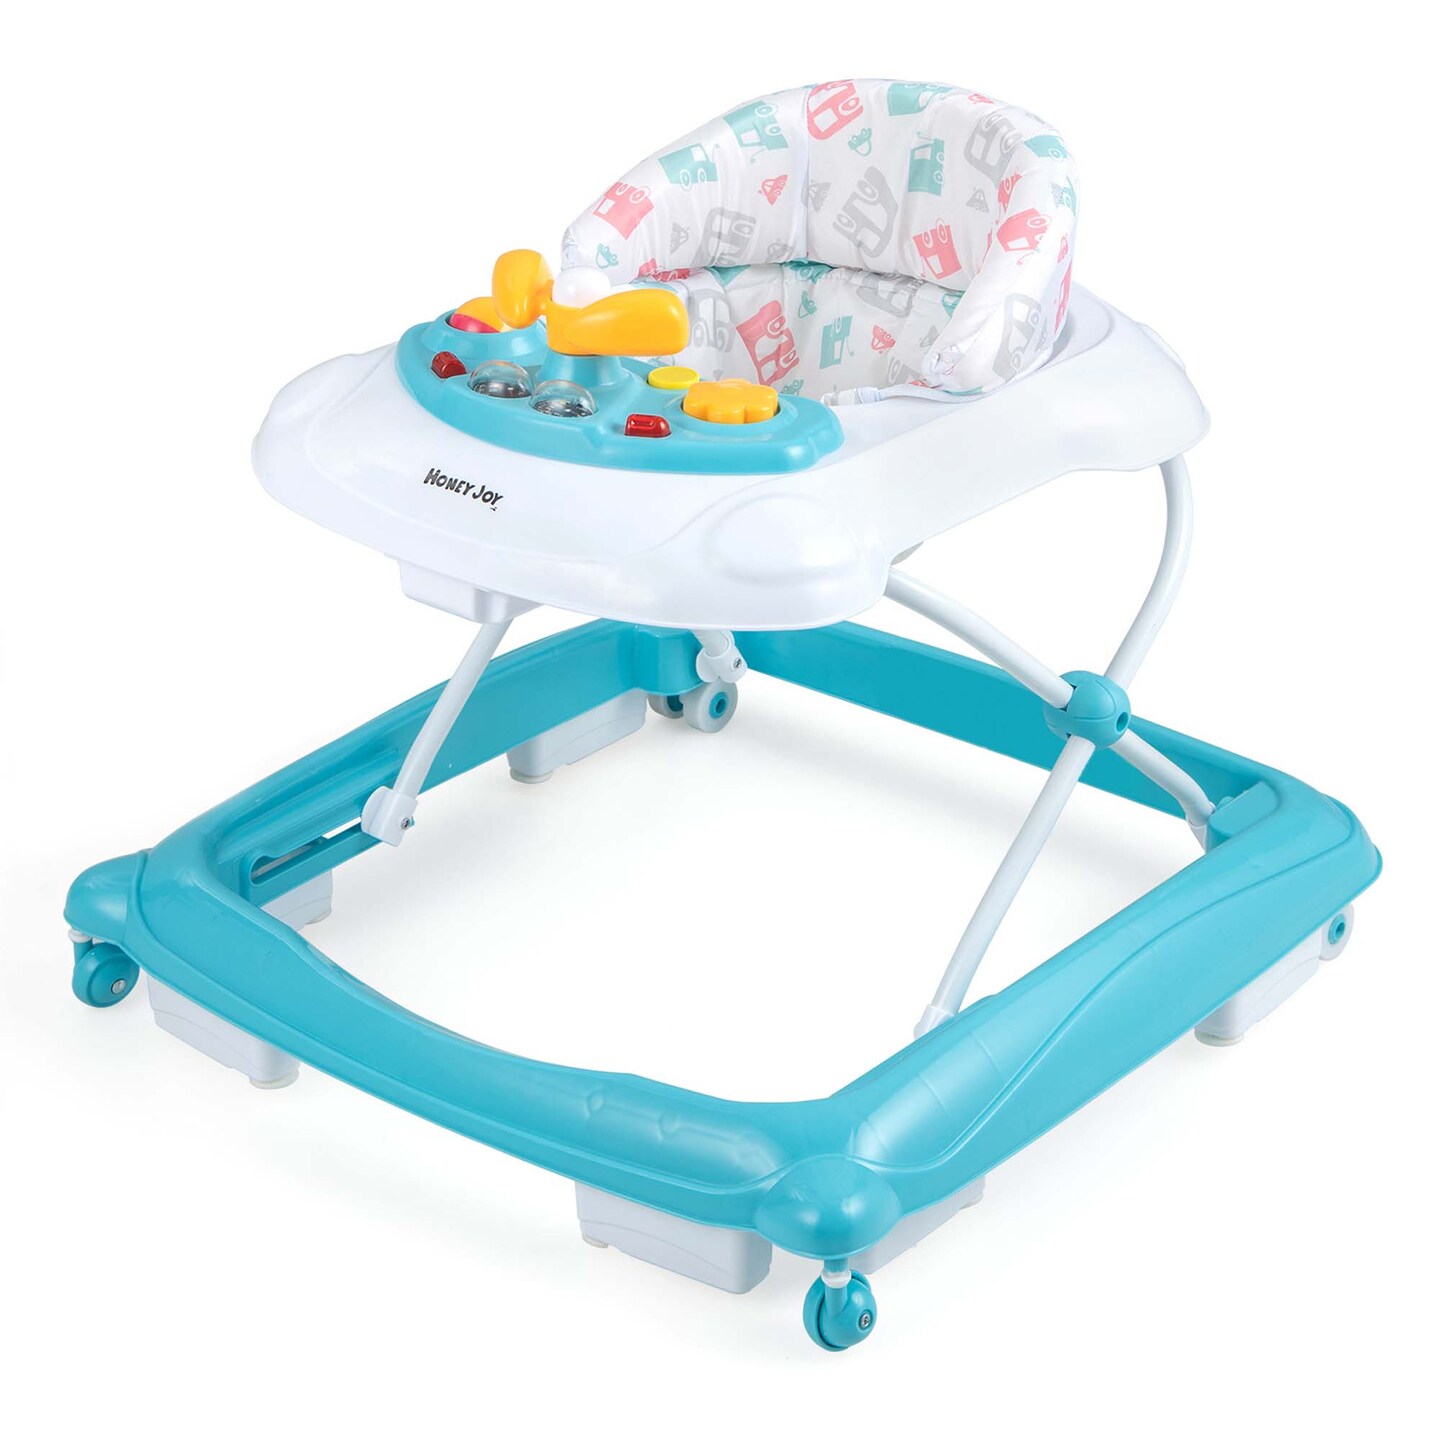 Honeyjoy Foldable Baby Walker with 3 Adjustable Heights Comfy Padded Seat Music Tray Blue/Green/Grey/Pink